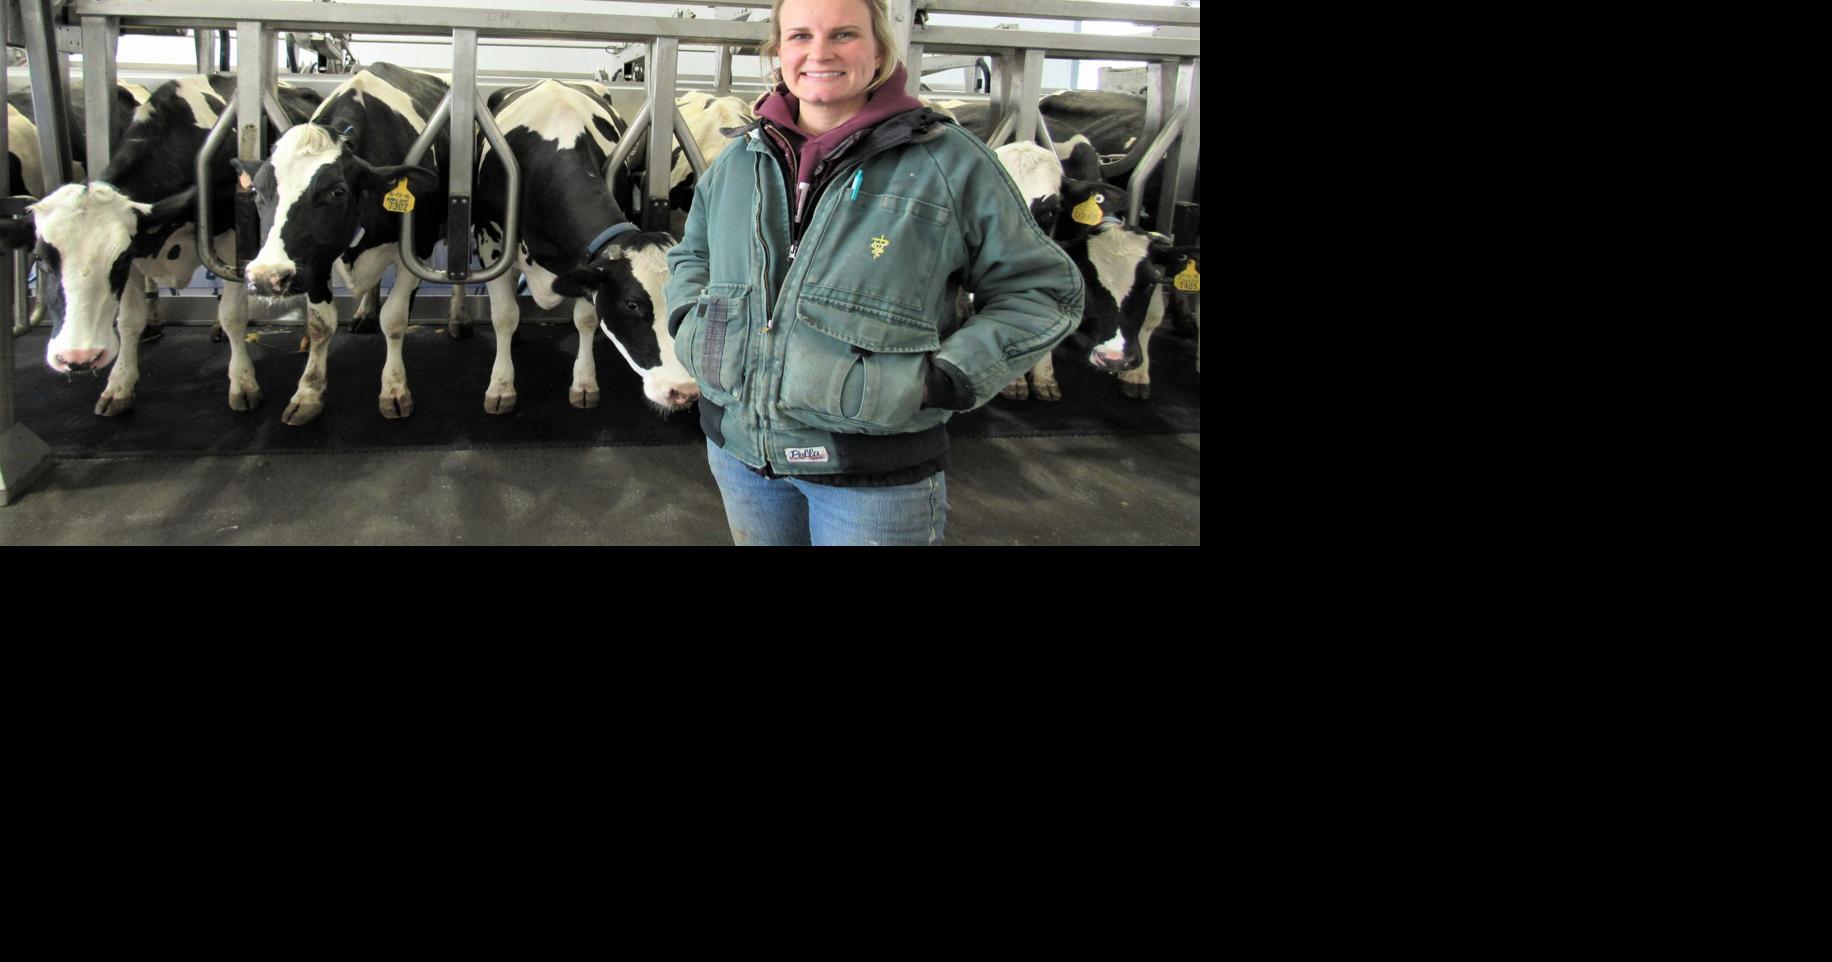 State-of-the-art milking parlor in Washington County an investment draw ...